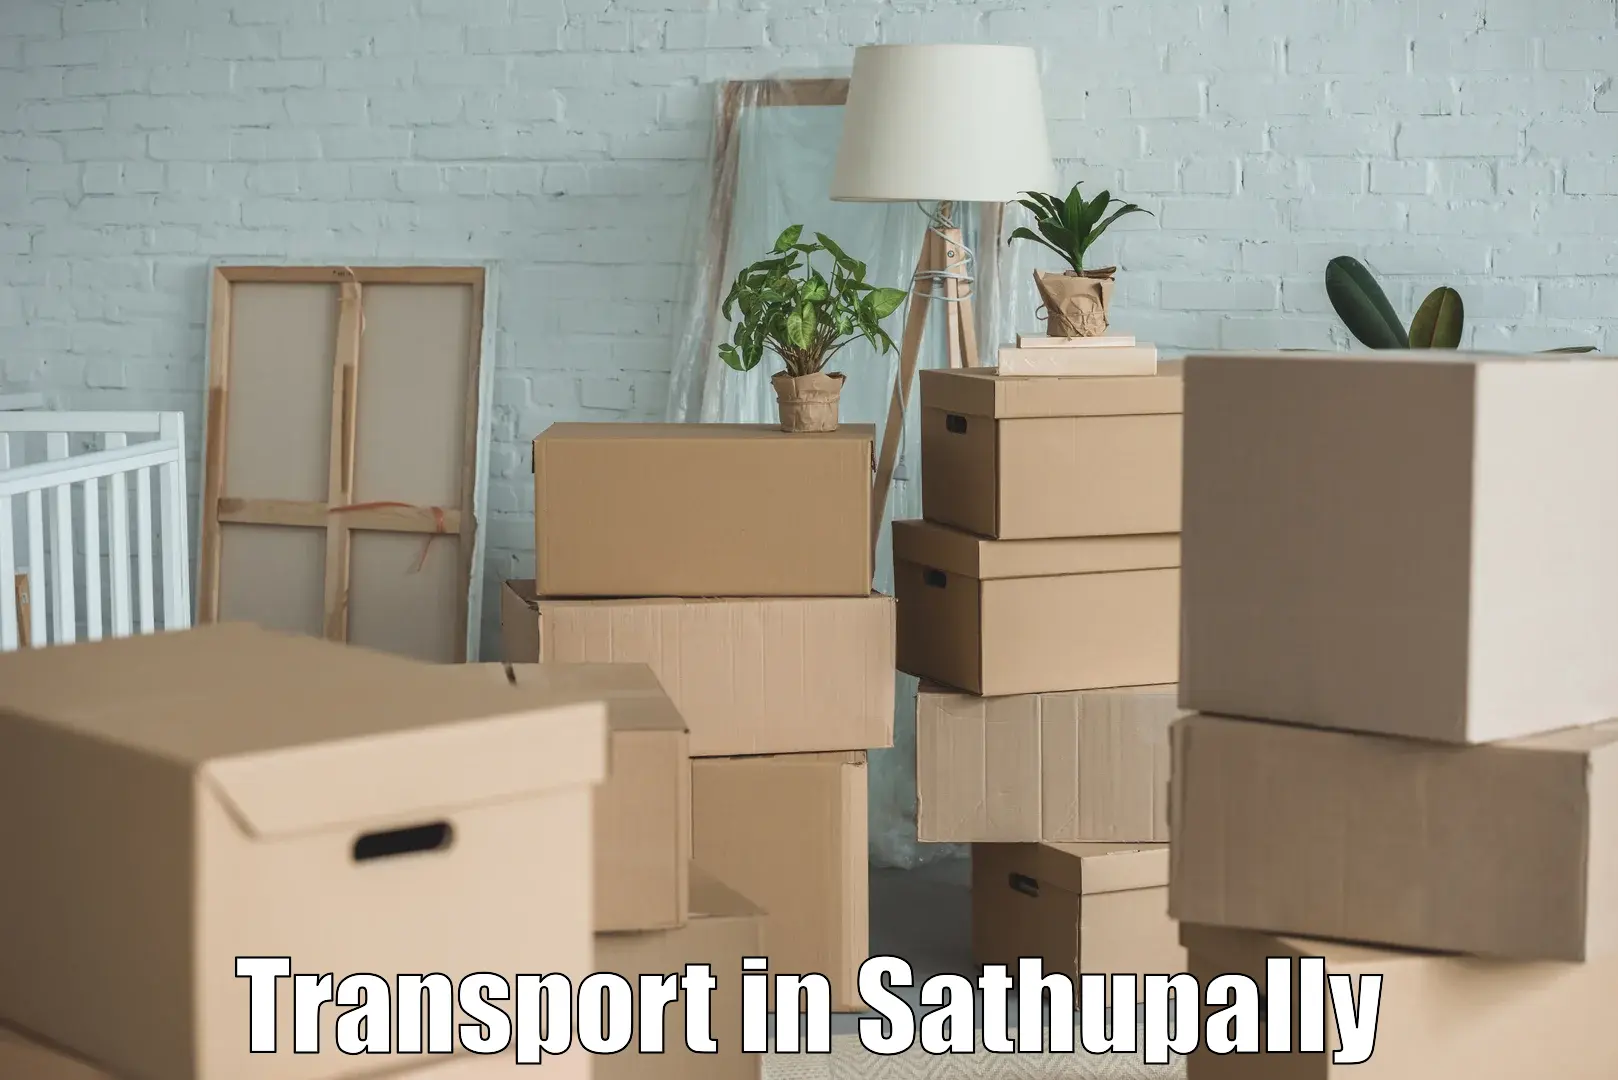 Intercity goods transport in Sathupally